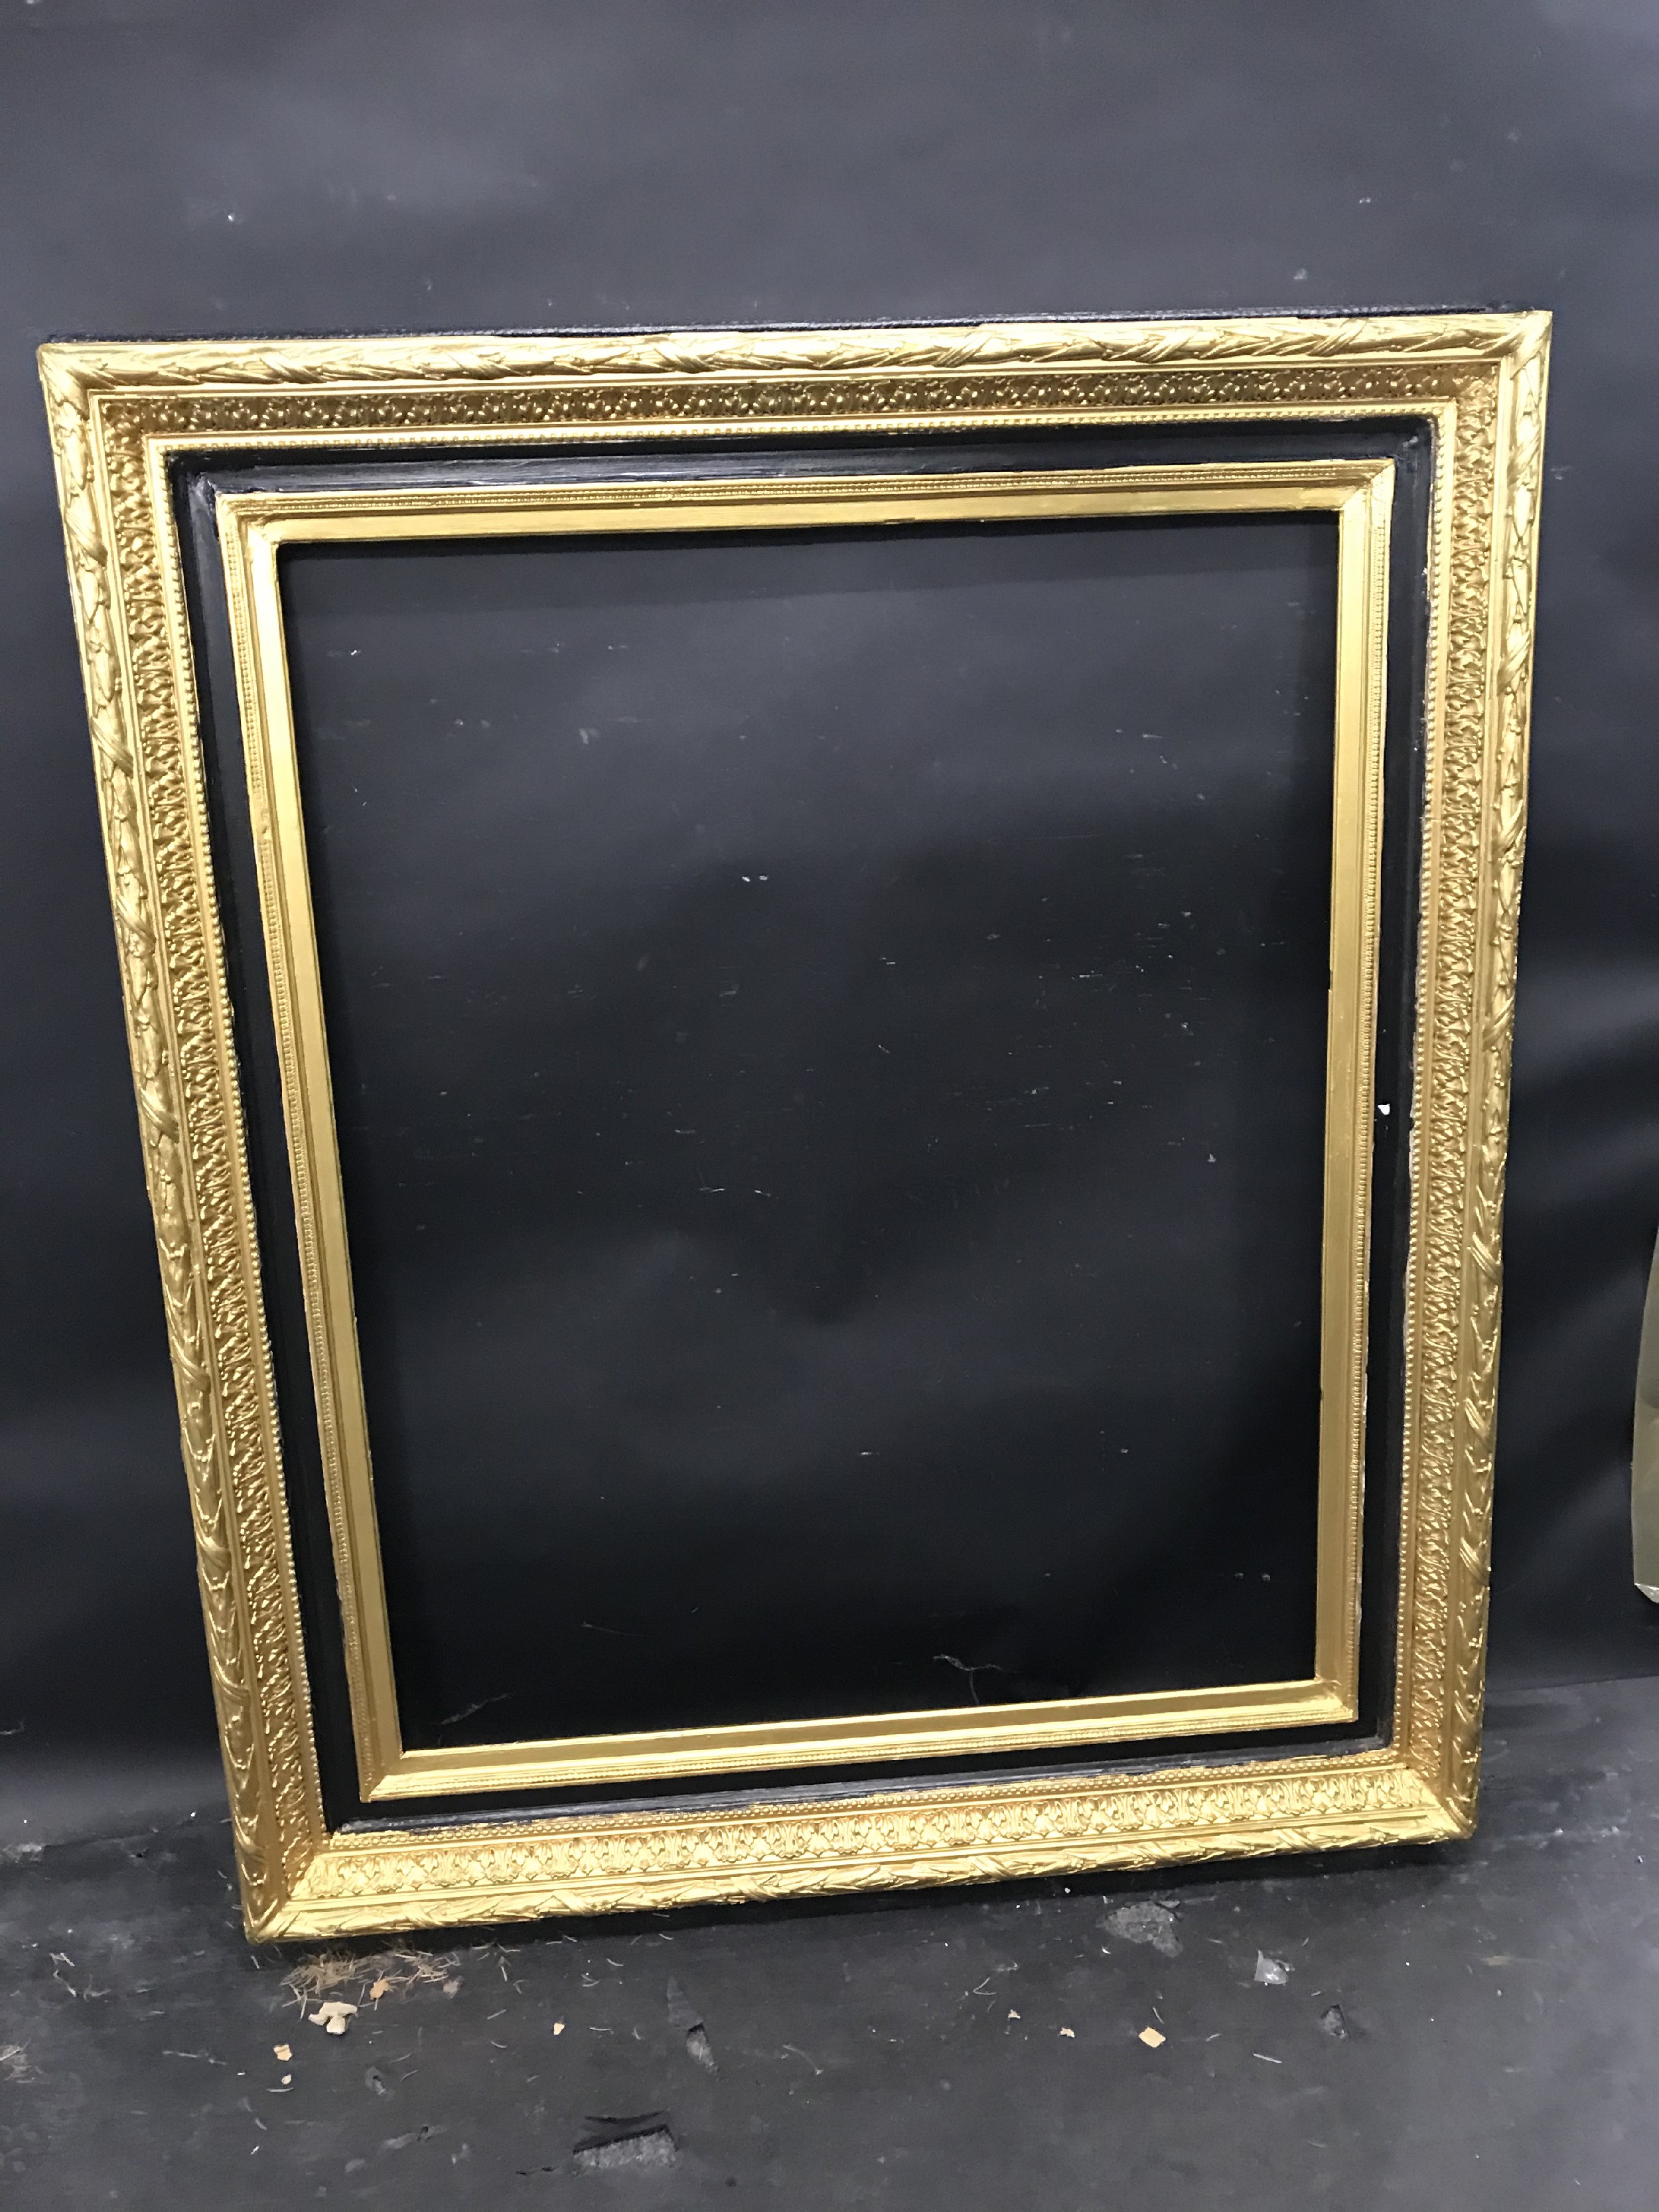 19th Century English School. A Gilt Composition Frame, with black inner and outer edges, 37" x 29.5" - Image 2 of 3